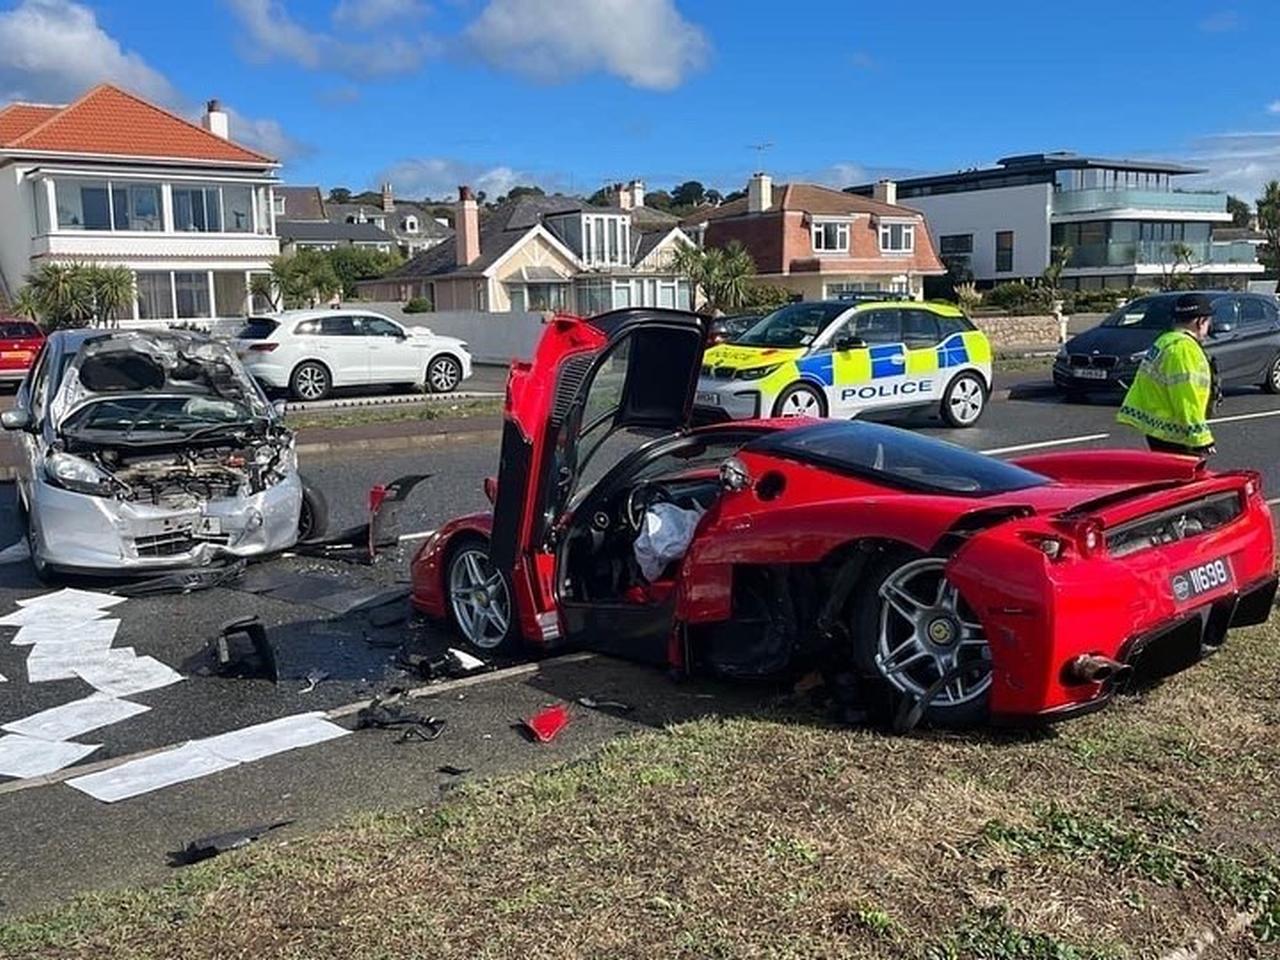 Ferrari Enzo crashes while being delivered to its owner - The Supercar Blog